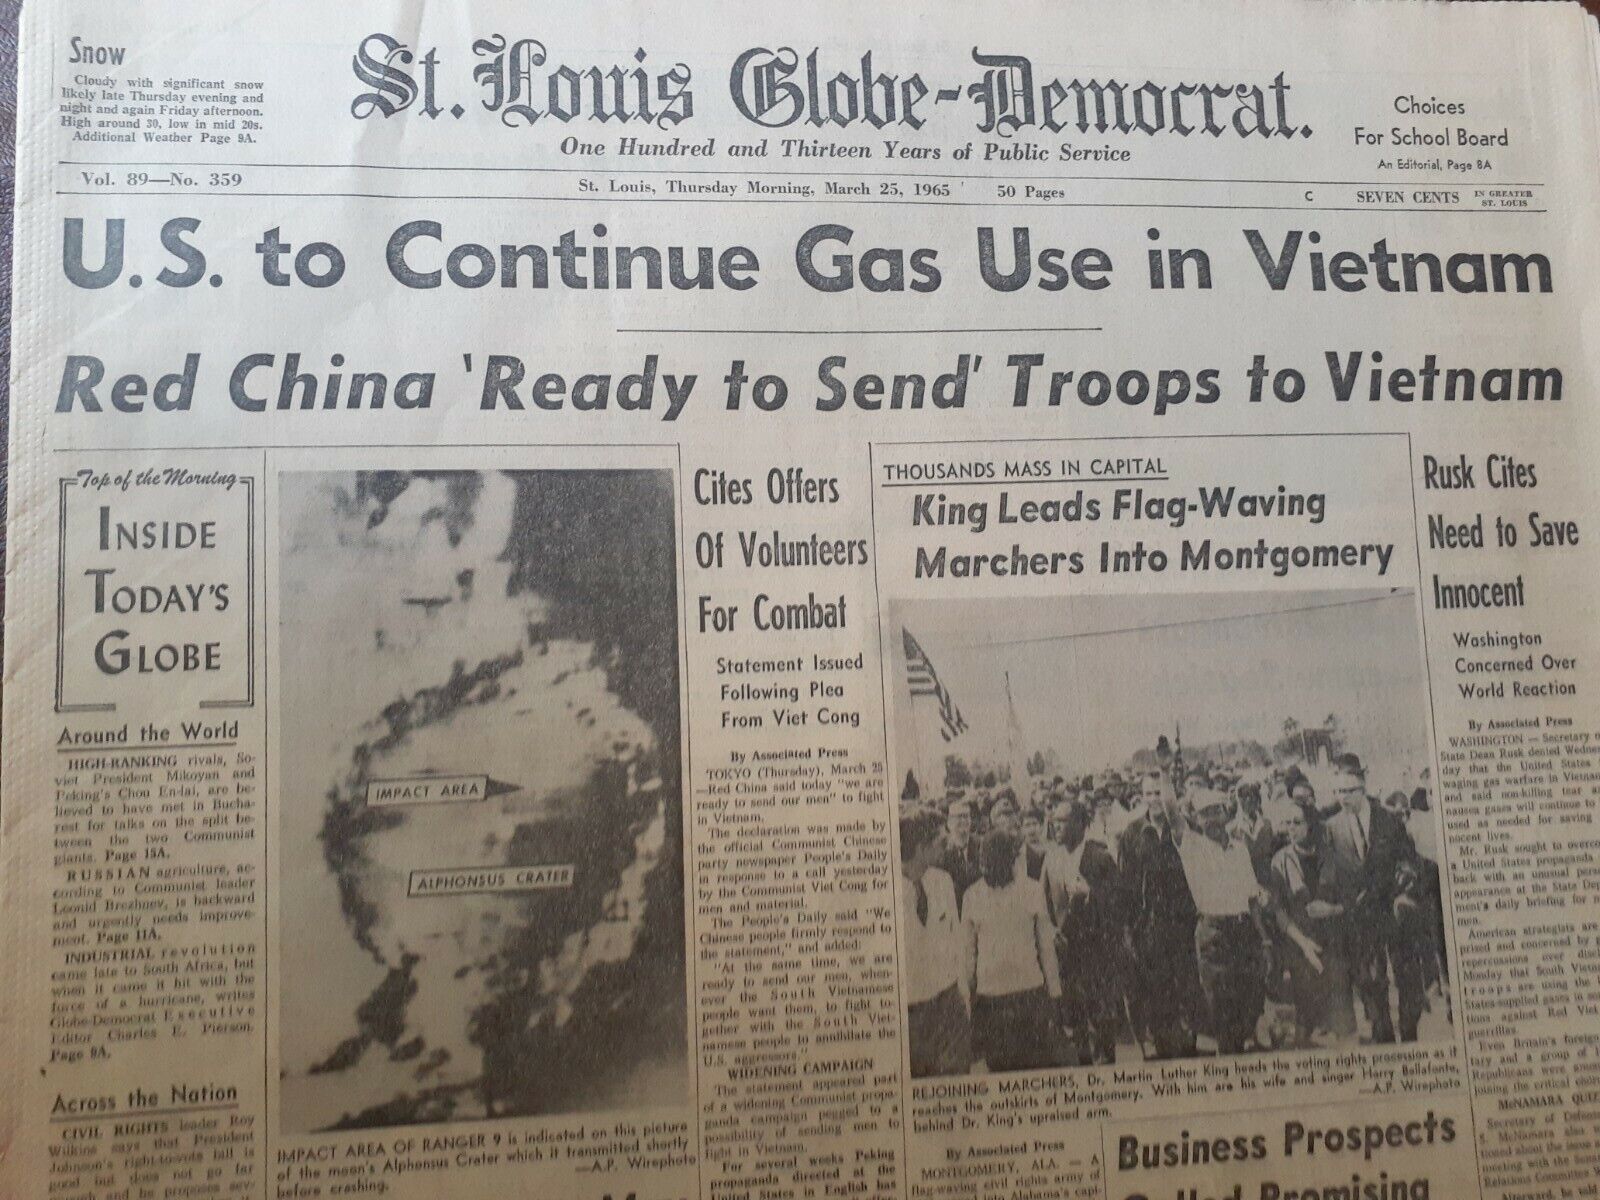 Newspapers- 'VICTORY DAY' AS MARTIN LUTHER KING LEADS MARCHERS INTO MONTGOMERY 